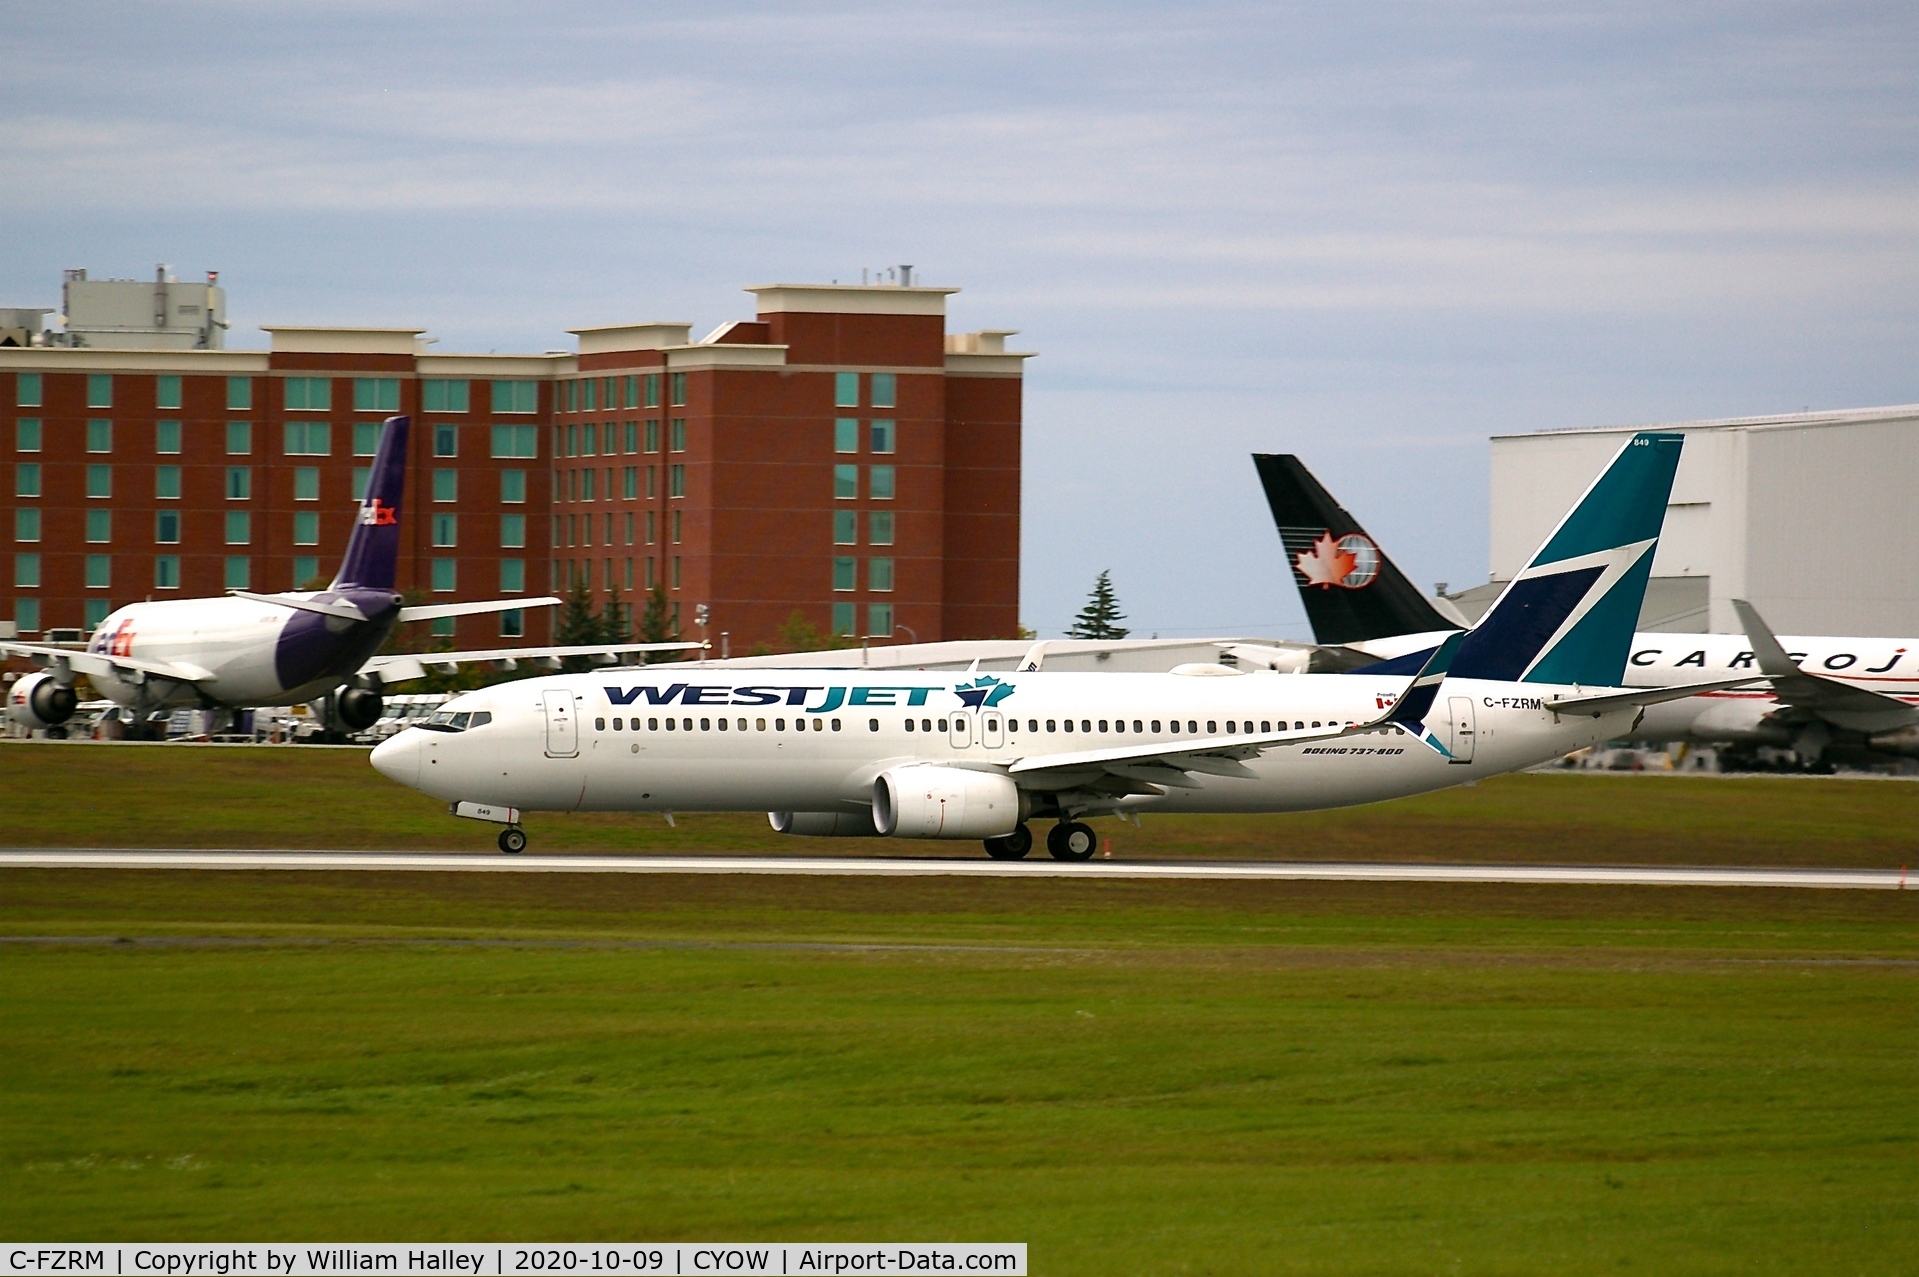 C-FZRM, 2016 Boeing 737-8CT C/N 40840, Westjet 737-8CT departing CYOW runway 25 with a Fedex A300 and Cargojet 767 in the background